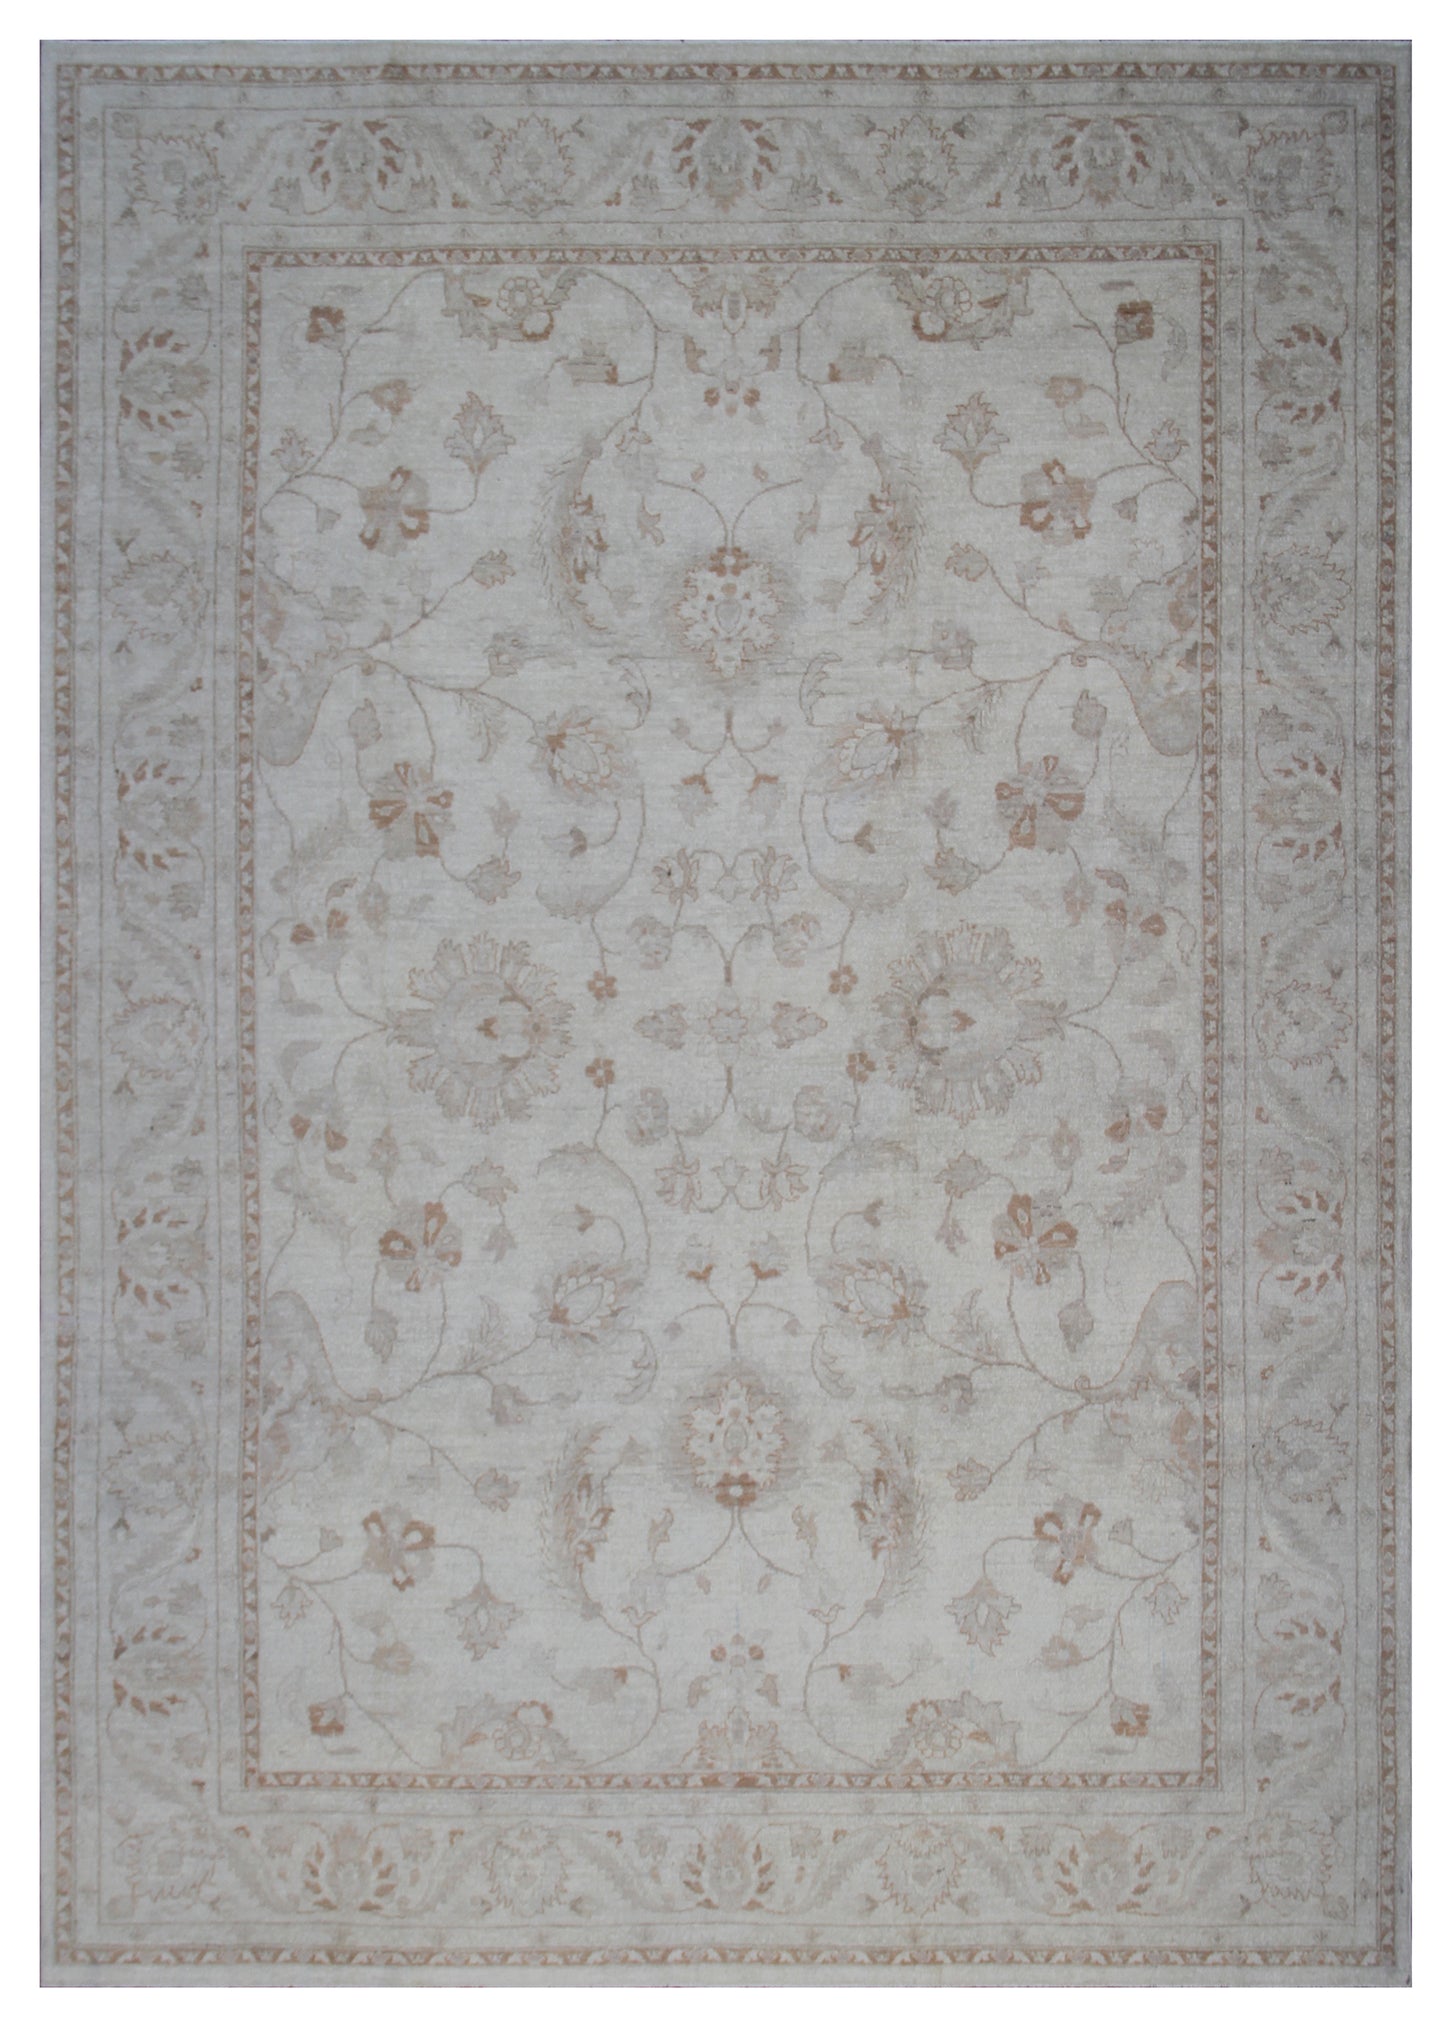 11'x9'Ariana Traditional Muted Agra Design Rug